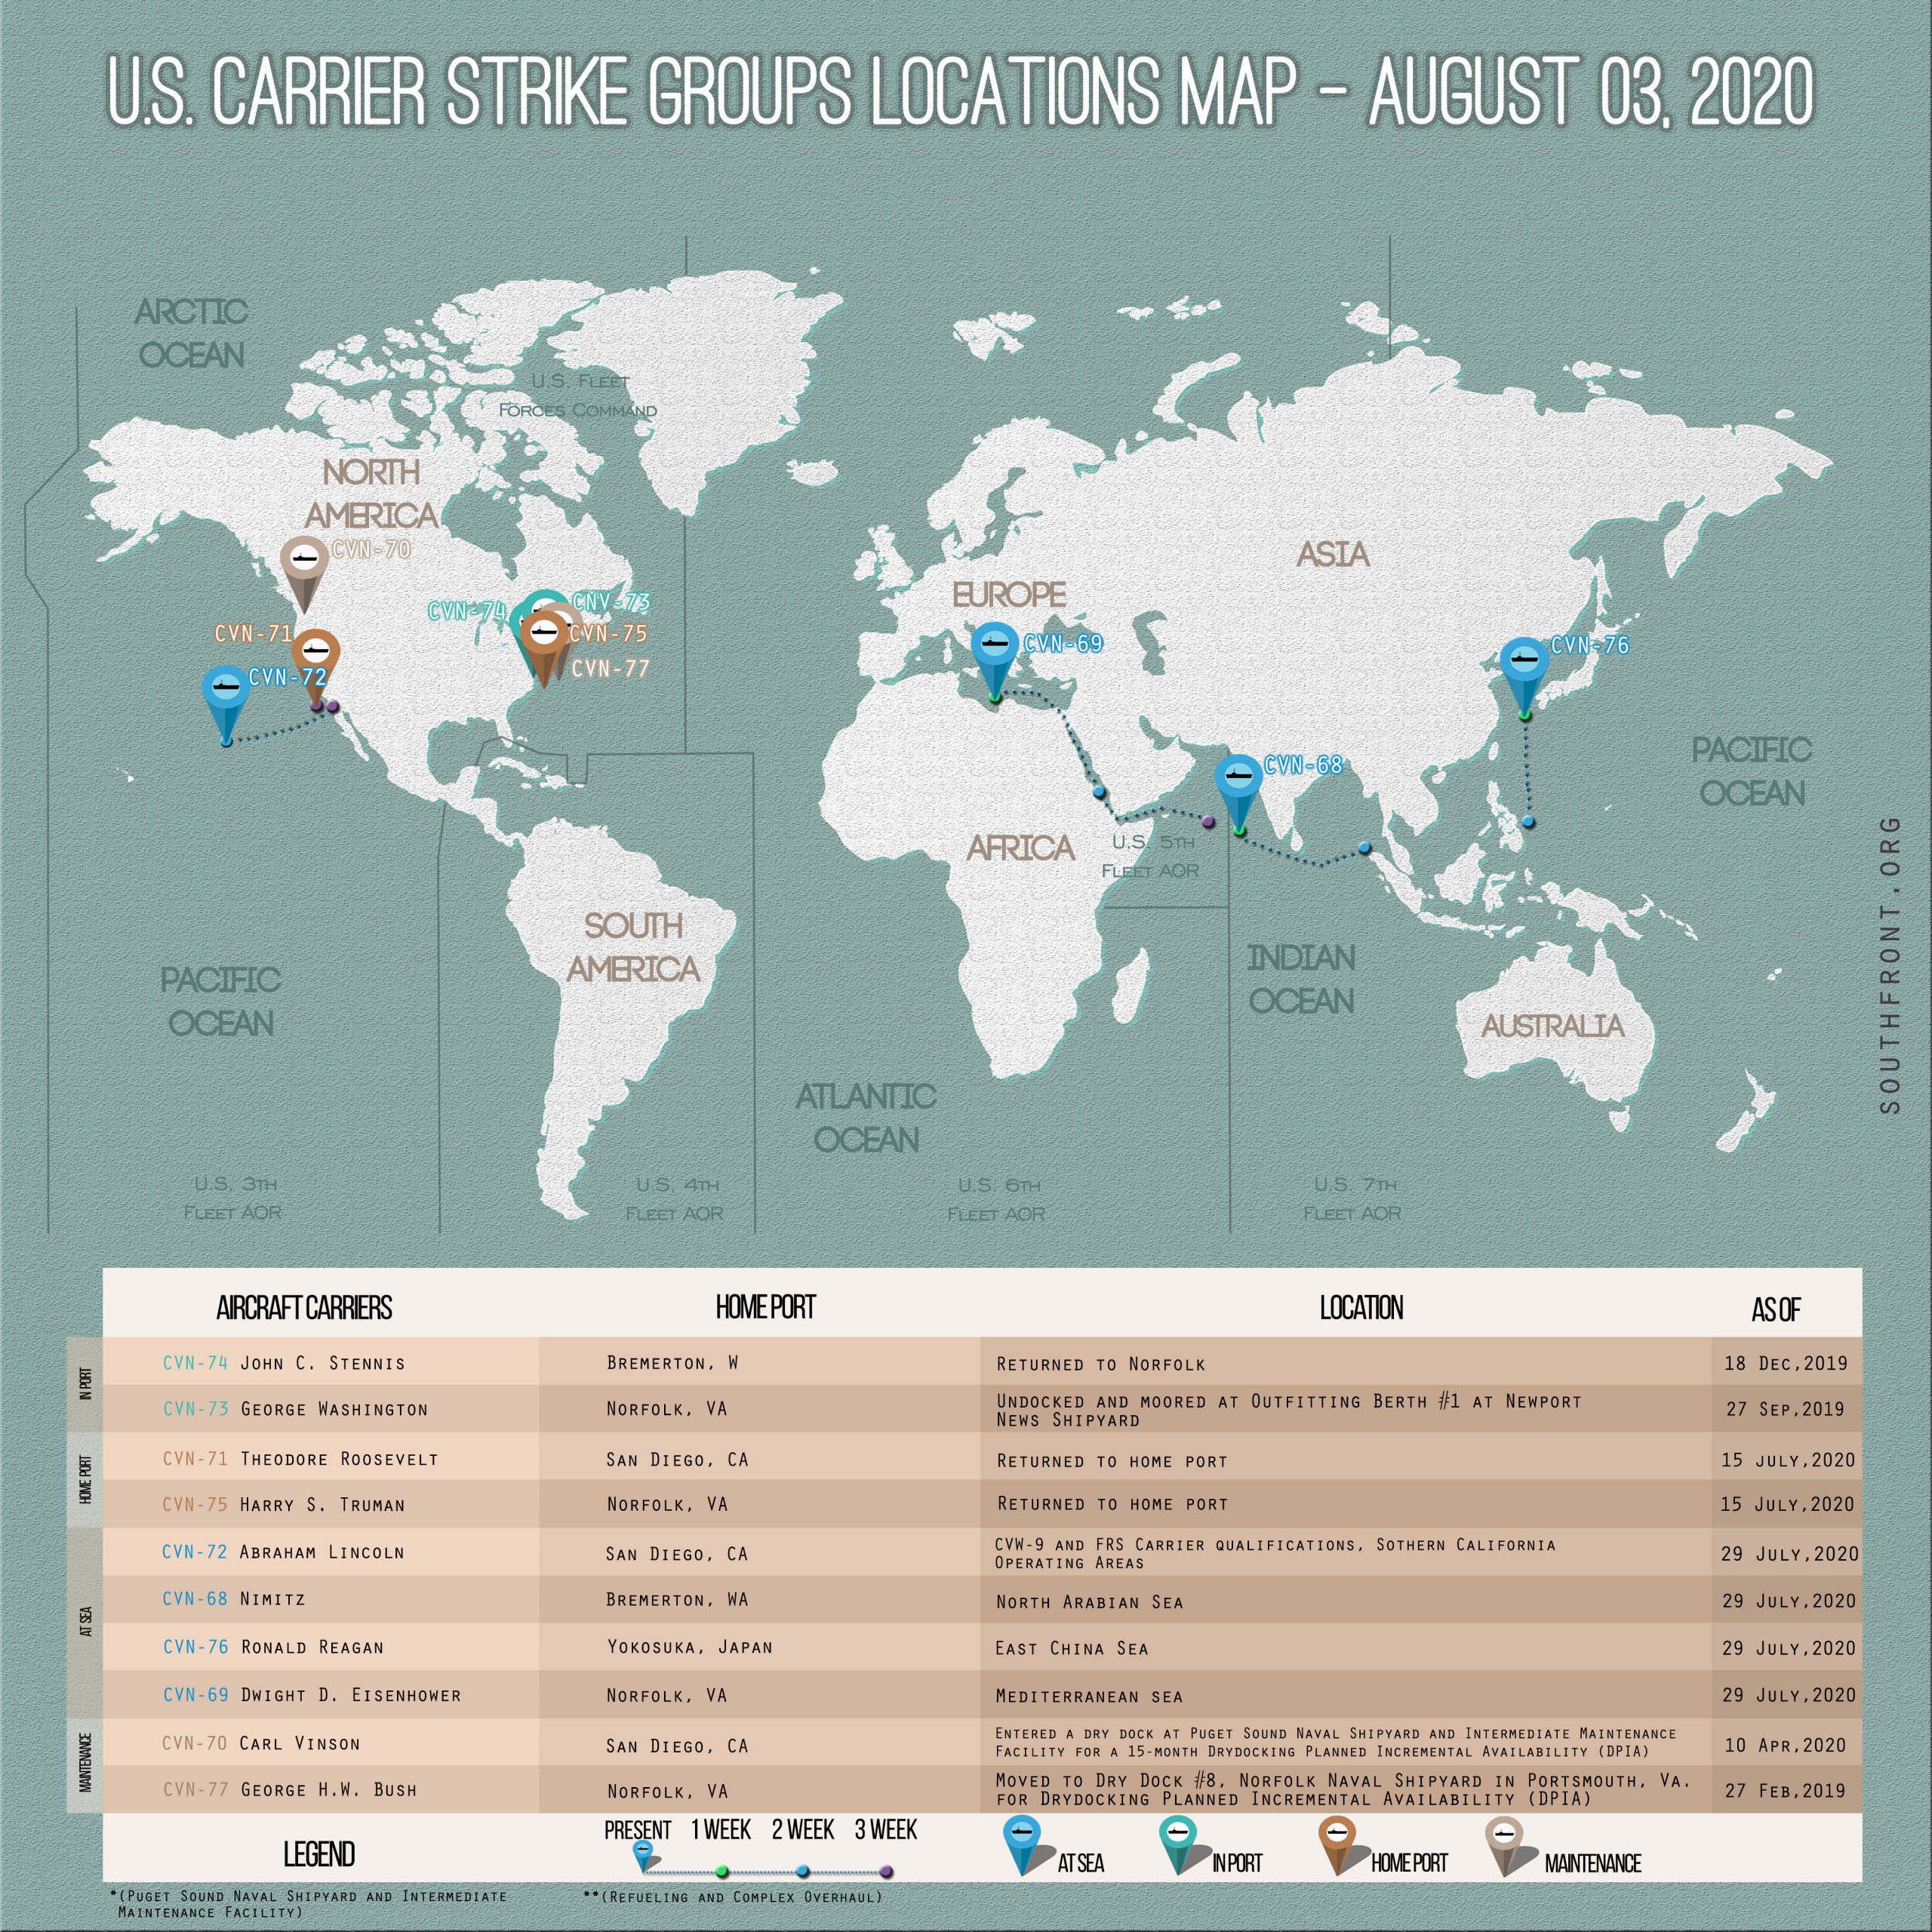 Locations Of US Carrier Strike Groups – August 3, 2020